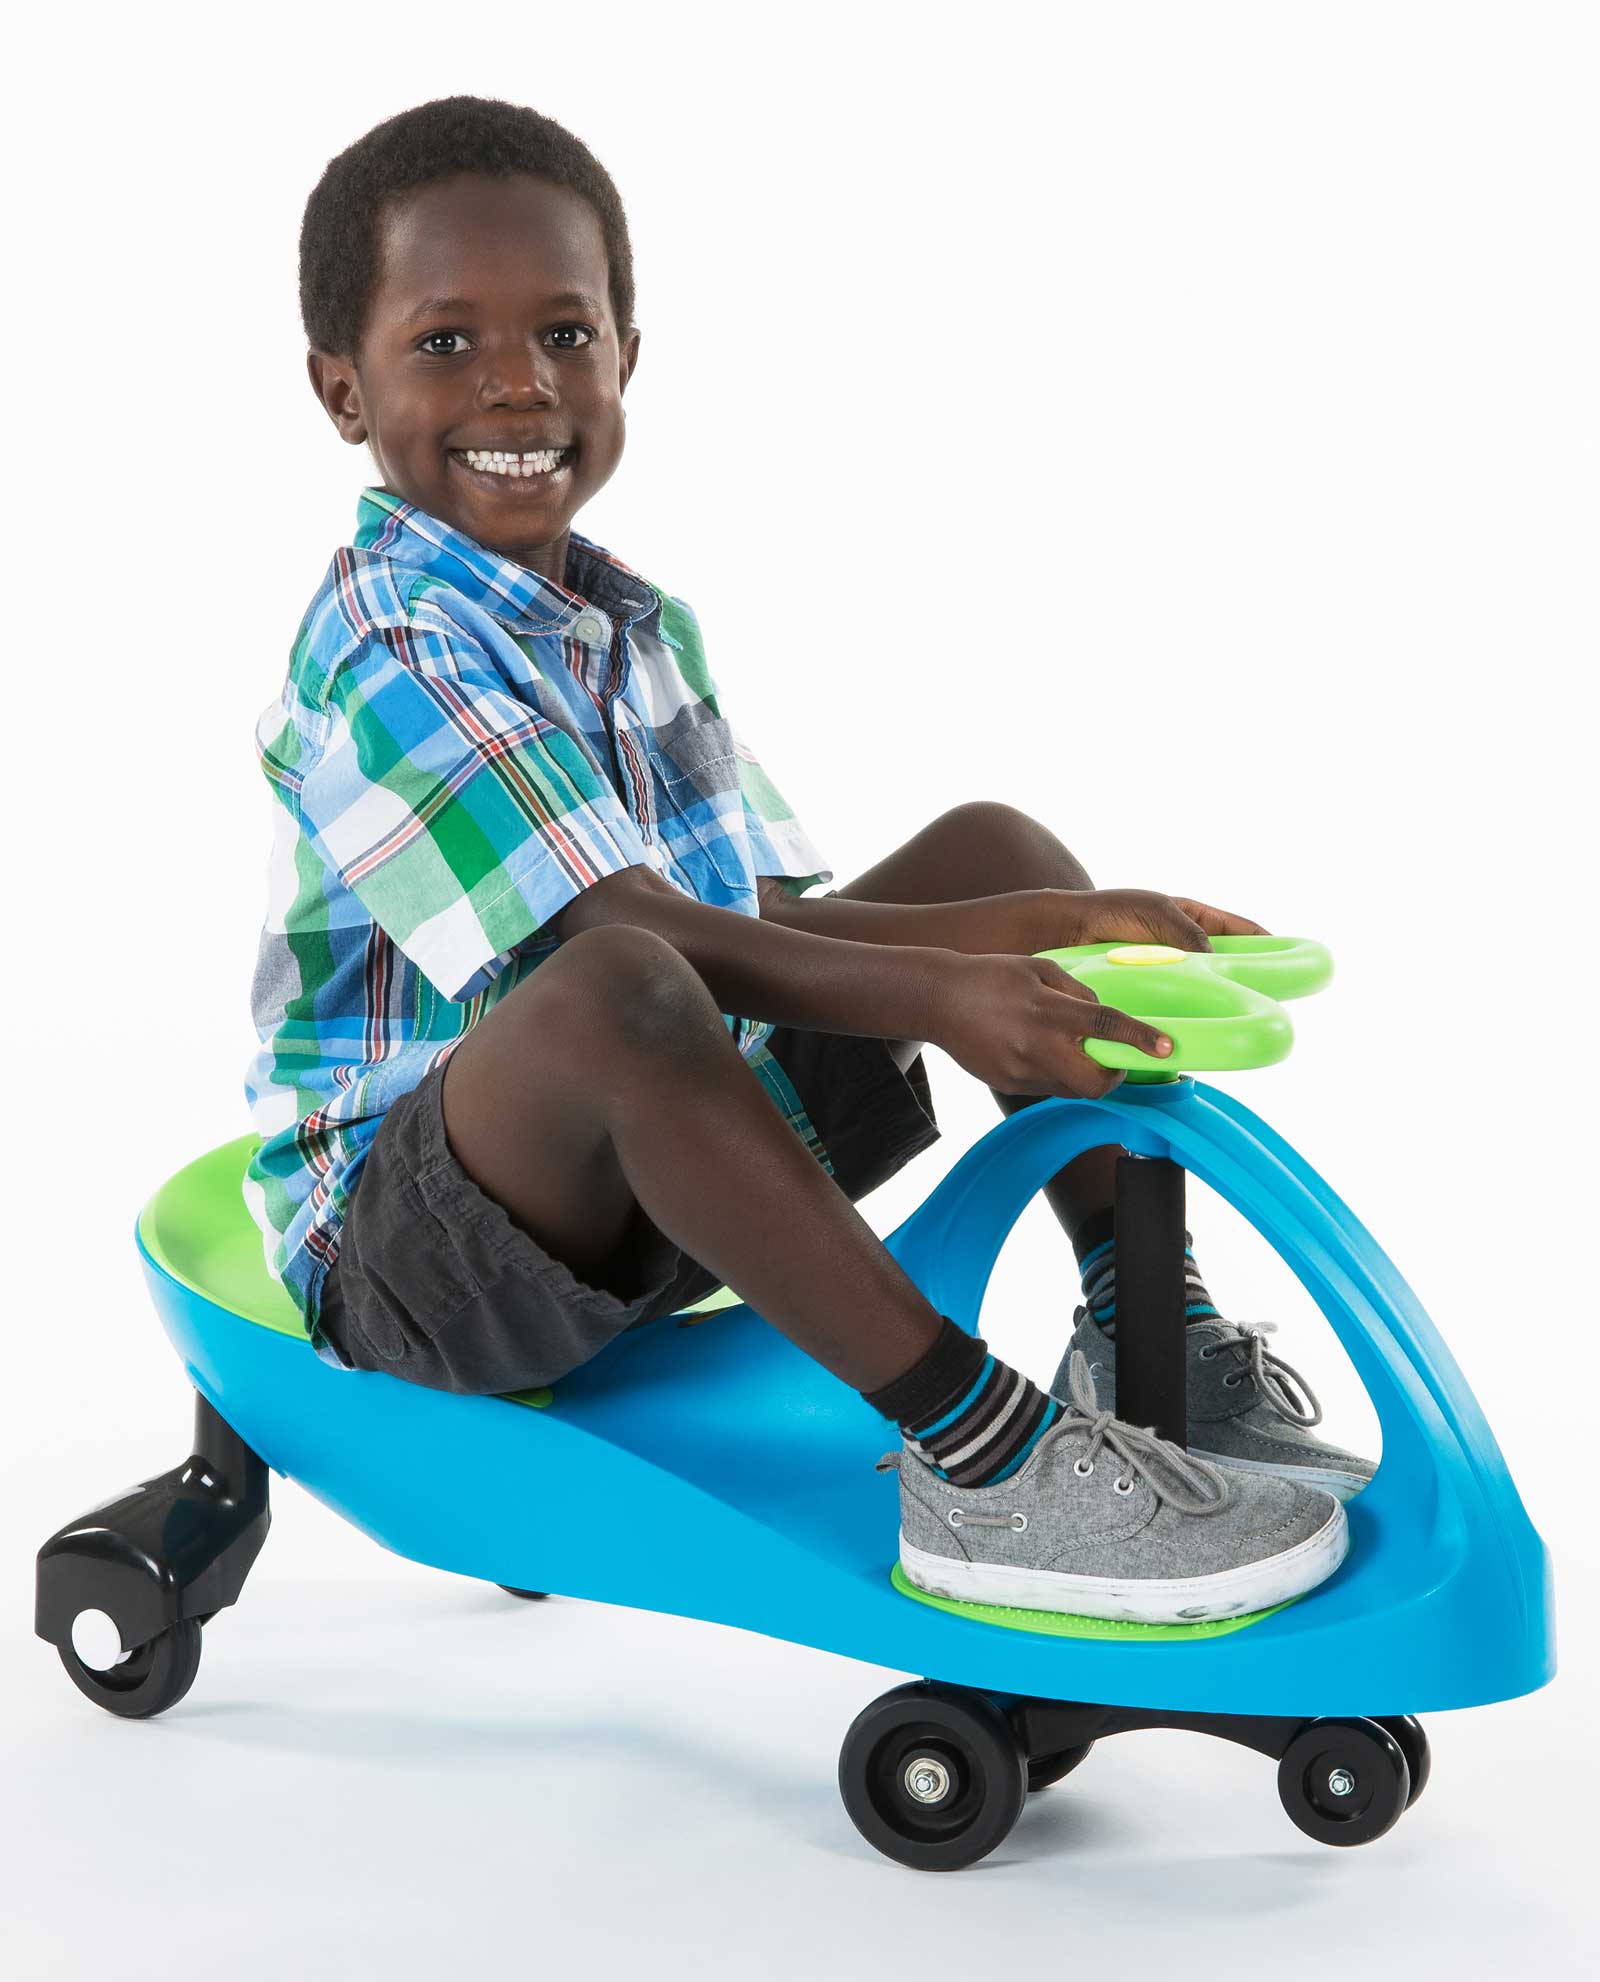 or pedals Wiggle for endless fun Ride On Toy Twist No batteries Ages 3 yrs and Up Pink/Purple gears The Original PlasmaCar by PlaSmart Turn 